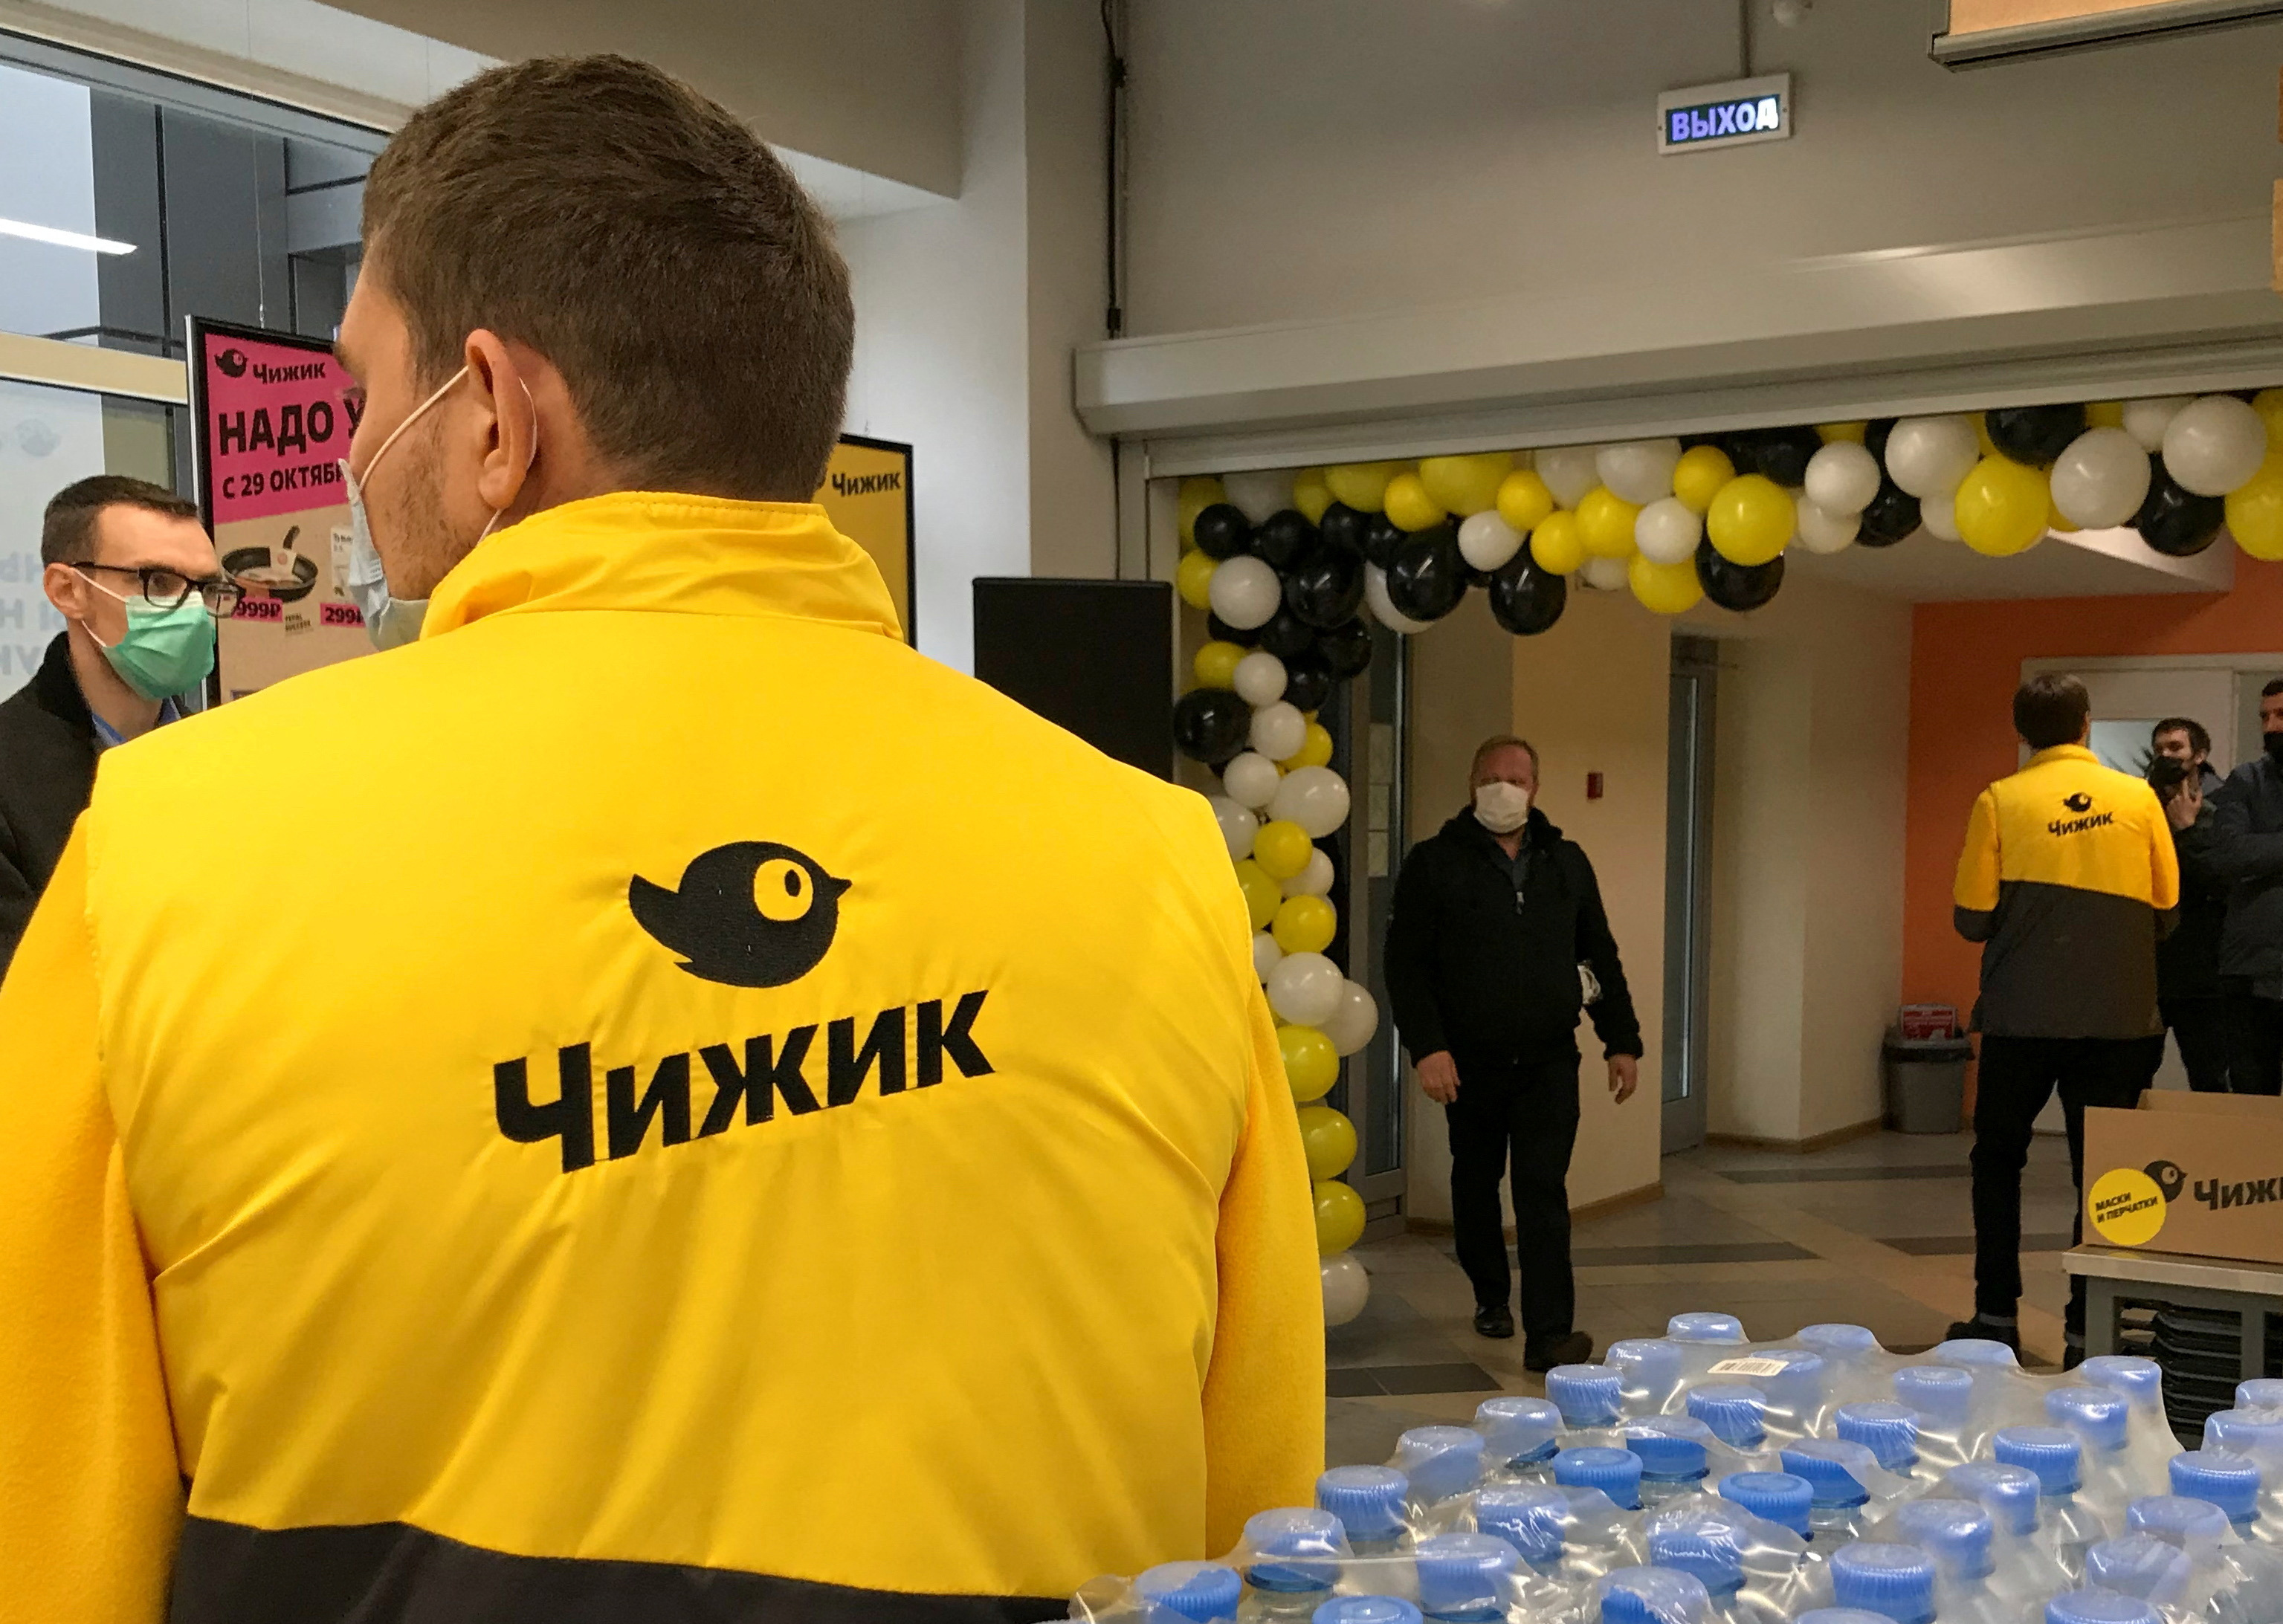 Employees attend a ceremony to launch the discount shop Chizhik in Moscow